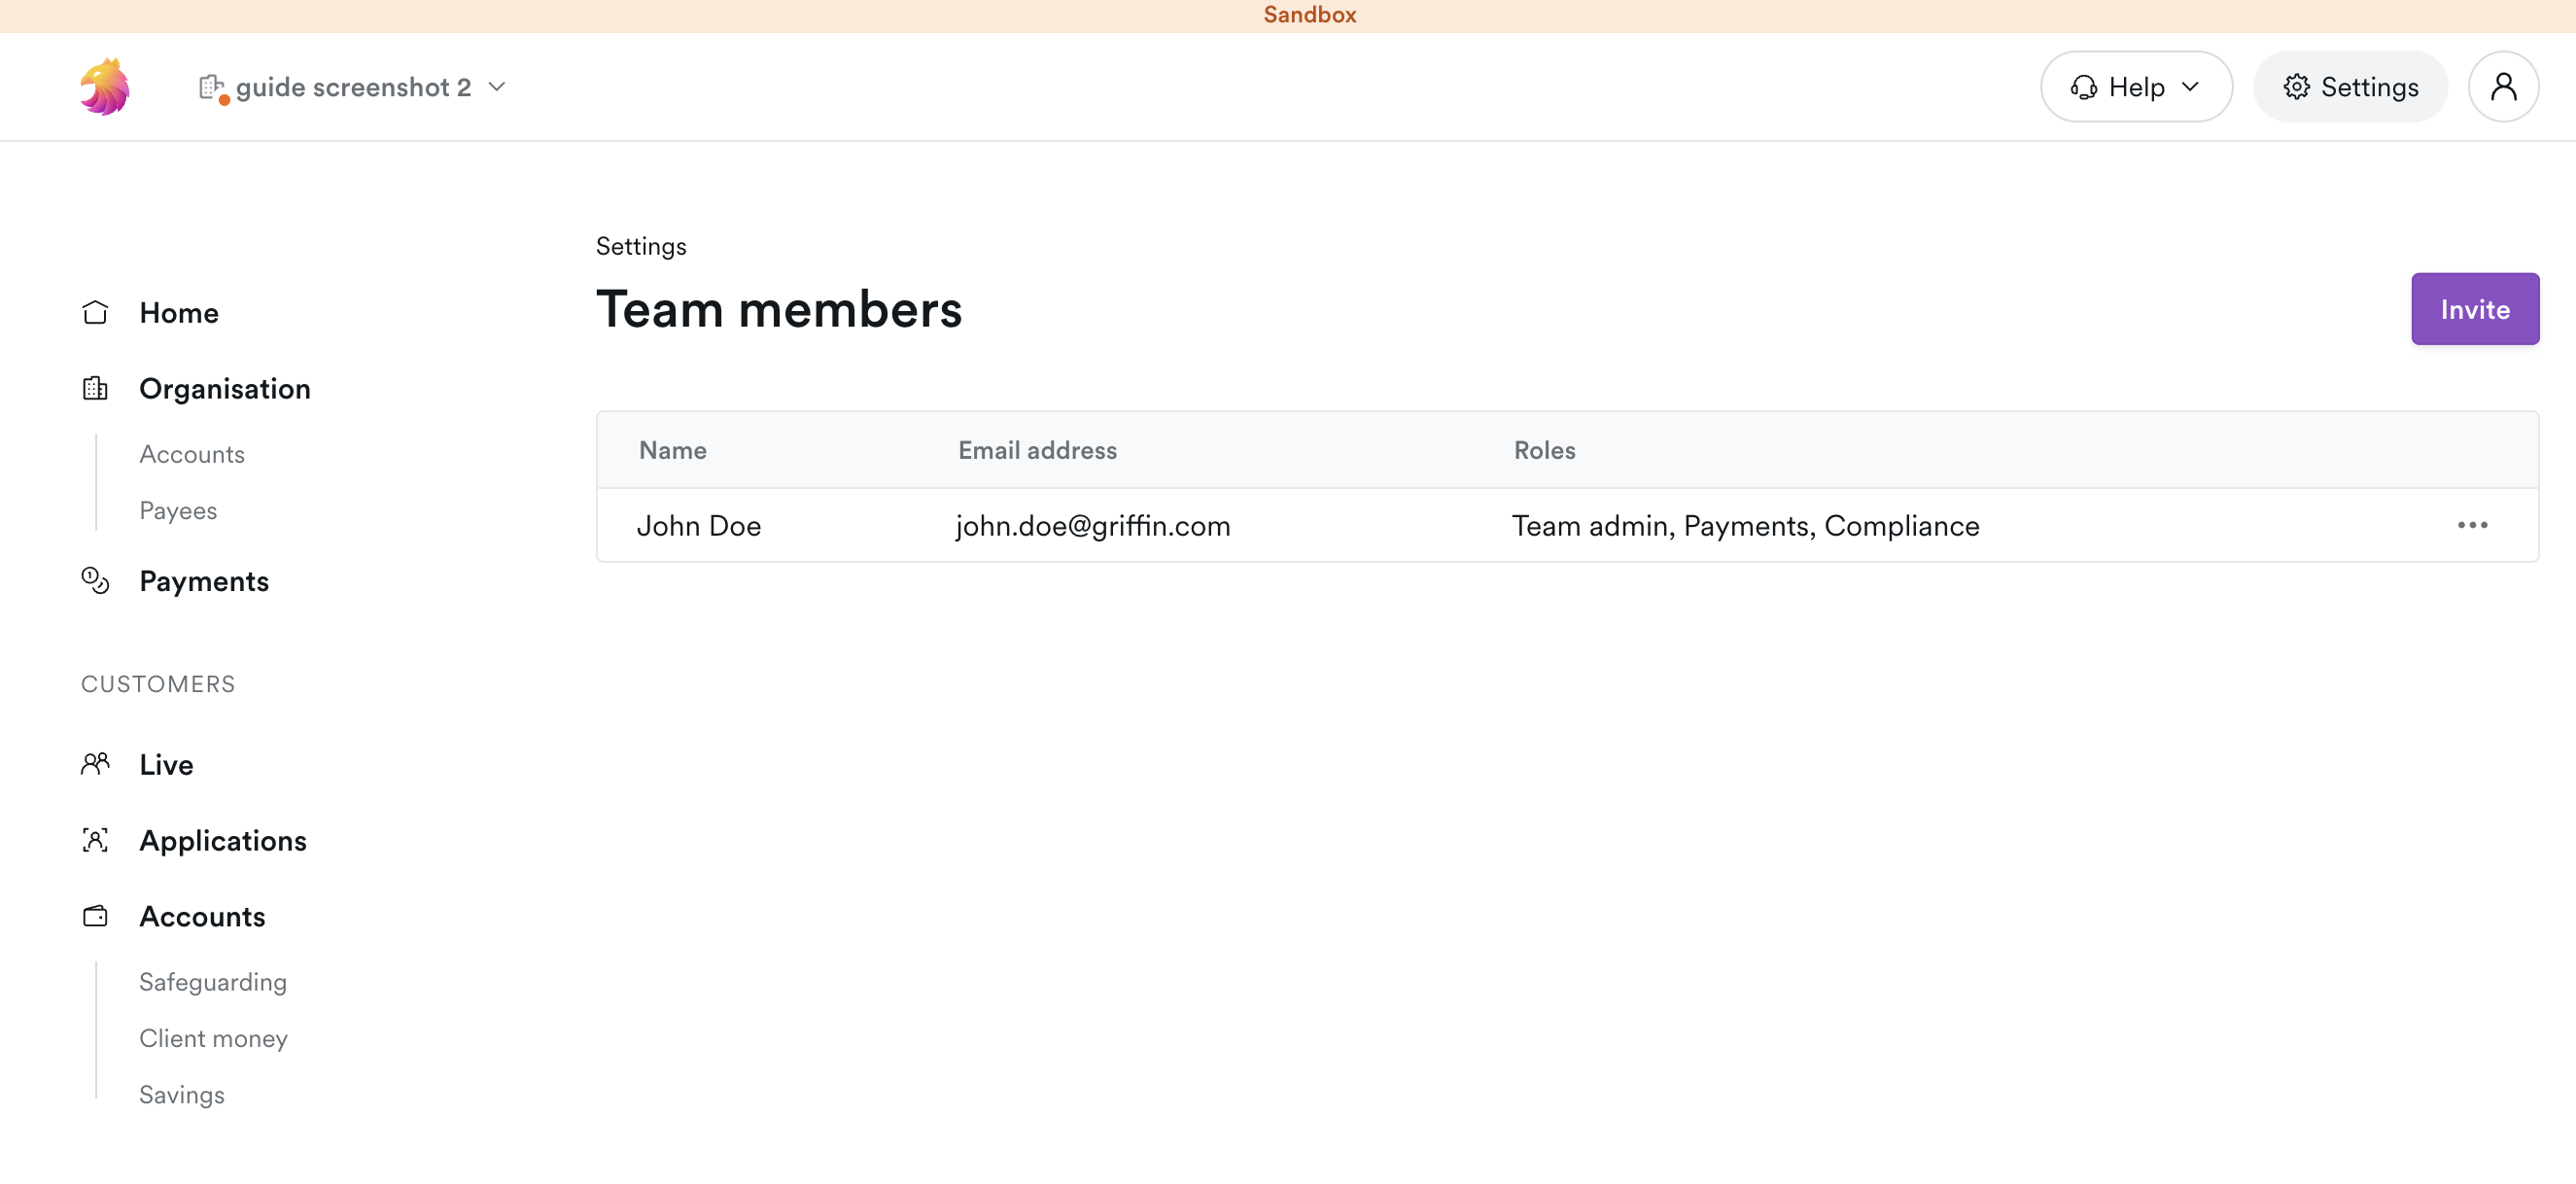 This is a screenshot of the team members page